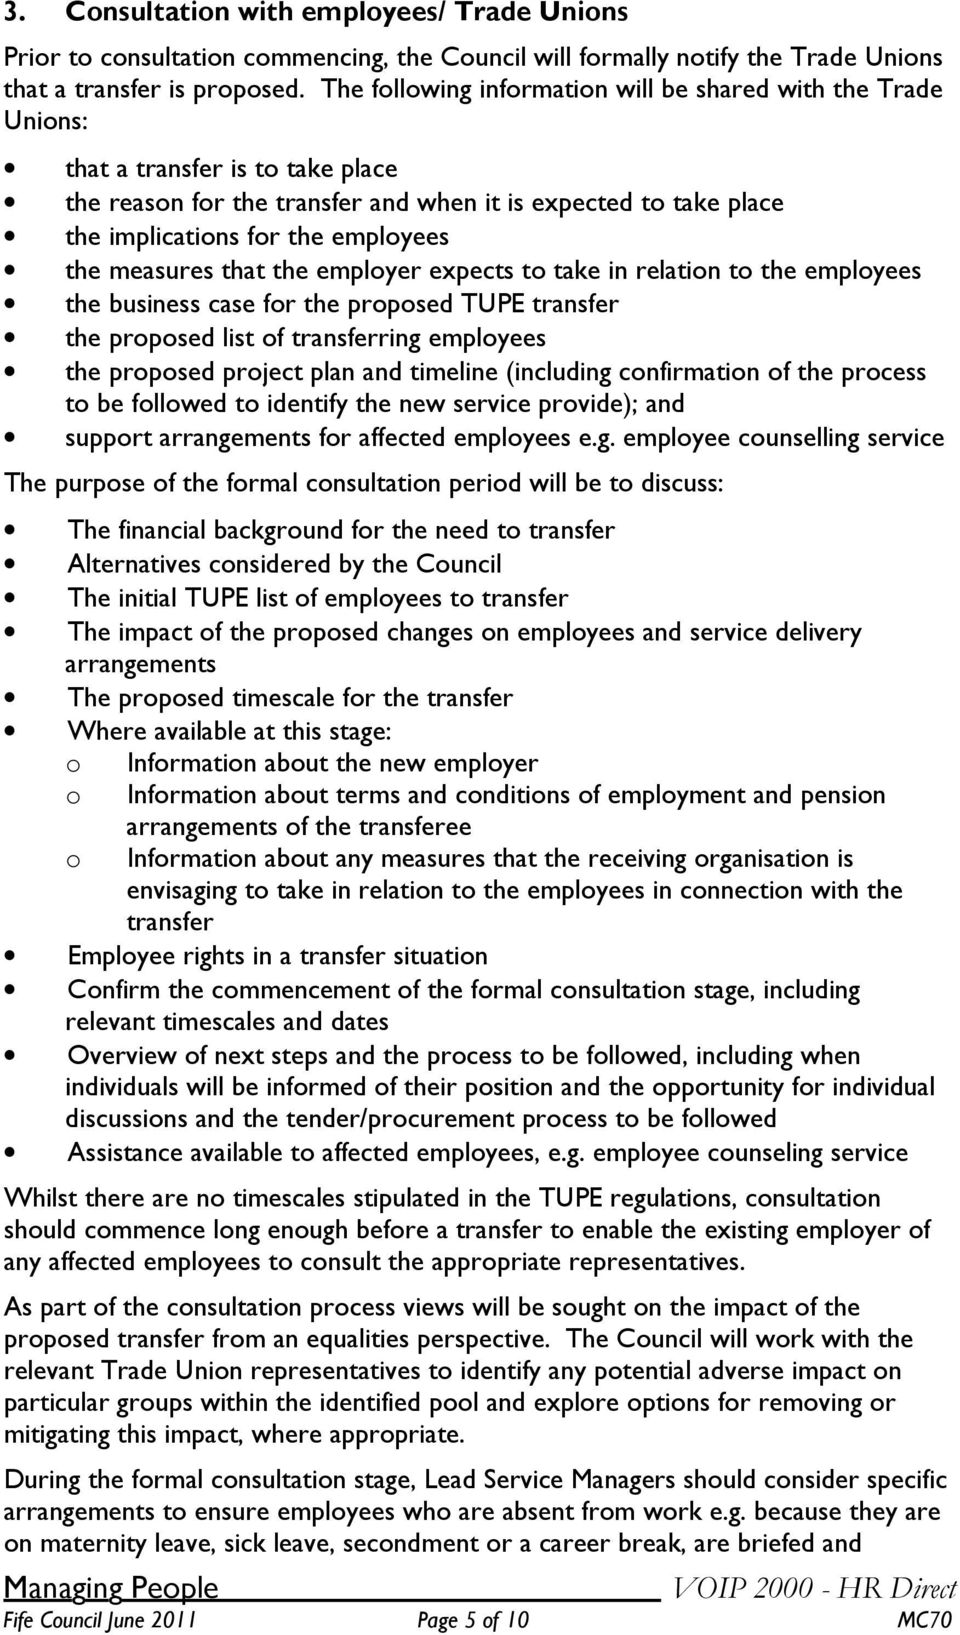 the measures that the employer expects to take in relation to the employees the business case for the proposed TUPE transfer the proposed list of transferring employees the proposed project plan and